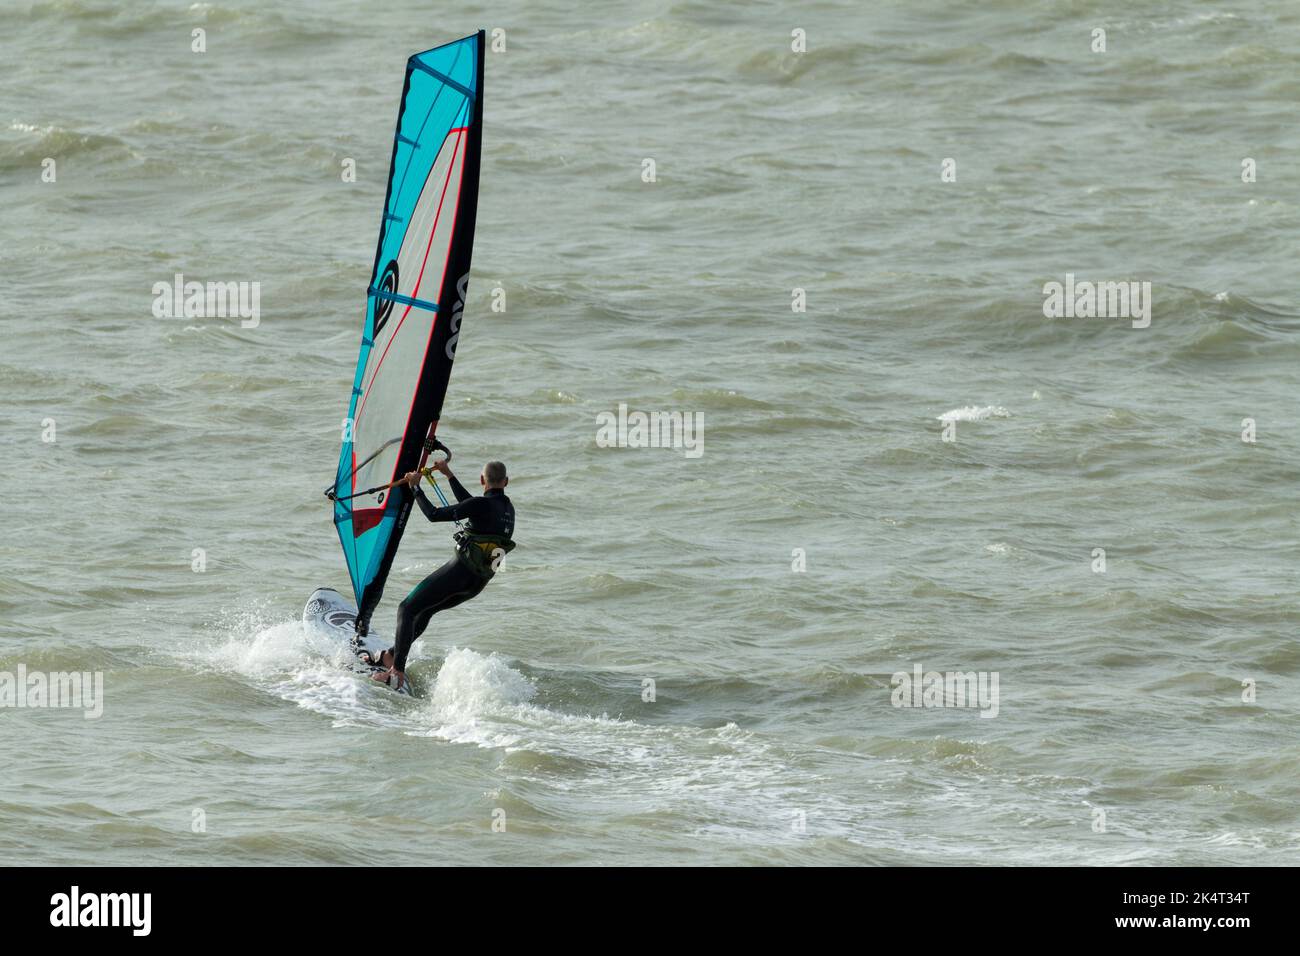 Water sport wind surfing in the sea with sail for catching the wind to propel the board and surfer sail is tilted and turned to steer and catch wind Stock Photo